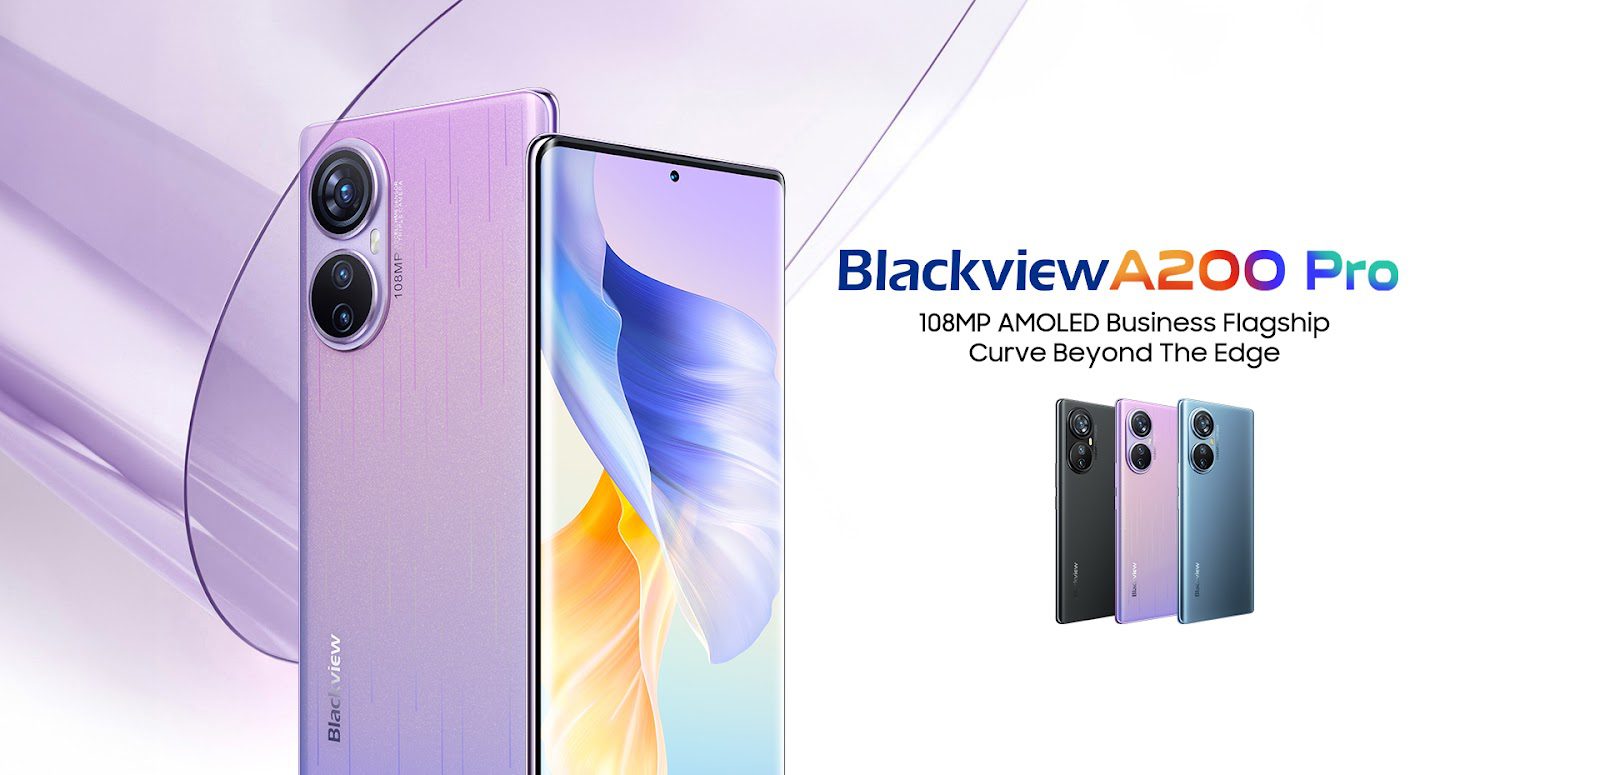 World Premiere of Blackview's First Curved-display Business Flagship: Blackview A200 Pro with 2.4K AMOLED Display, 108MP Camera, Helio G99, Up to 24GB RAM